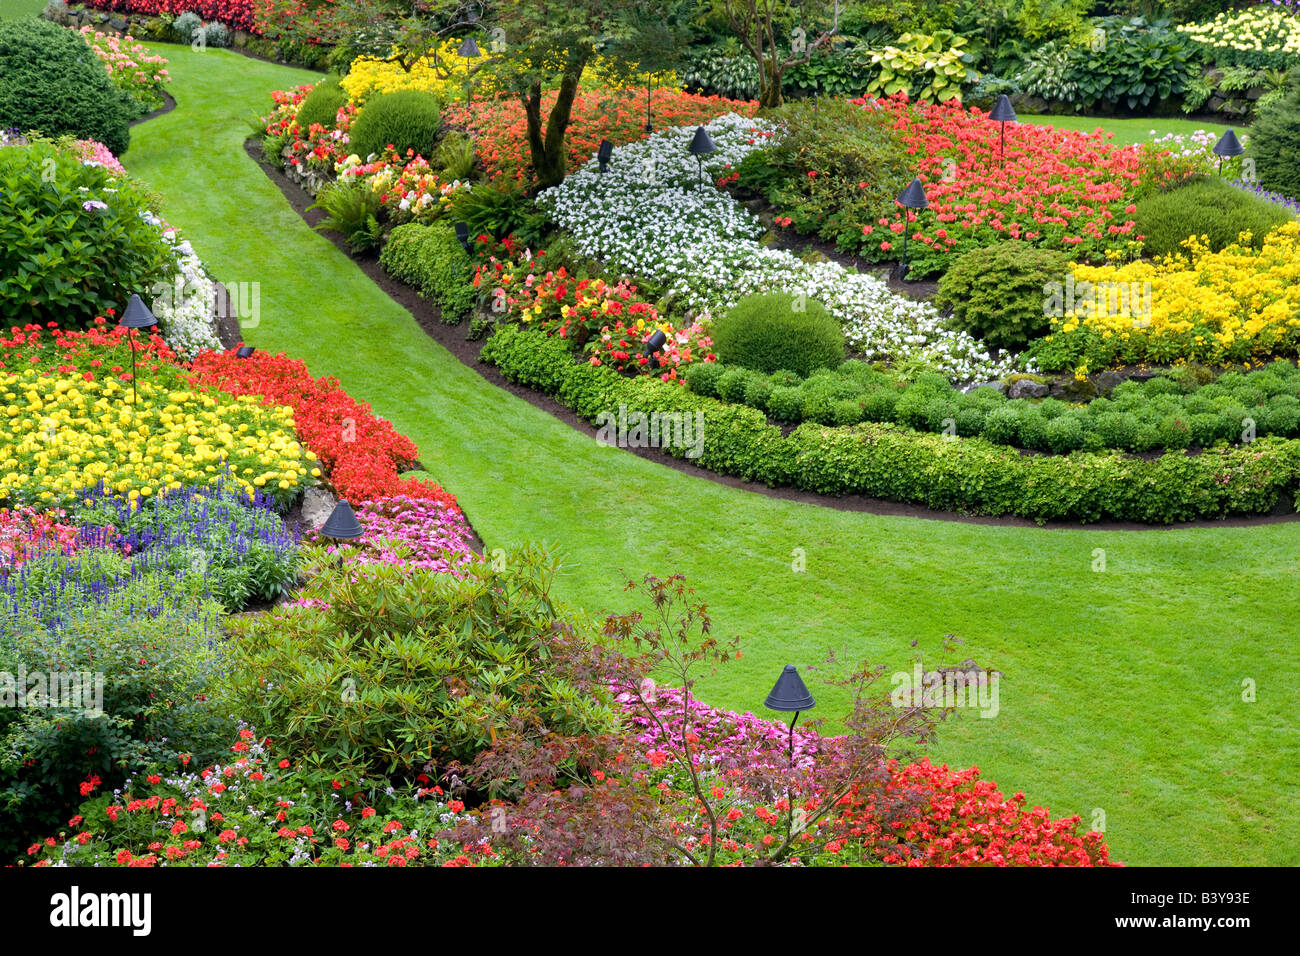 Flower beds at Butchart Gardens B C Canada Stock Photo